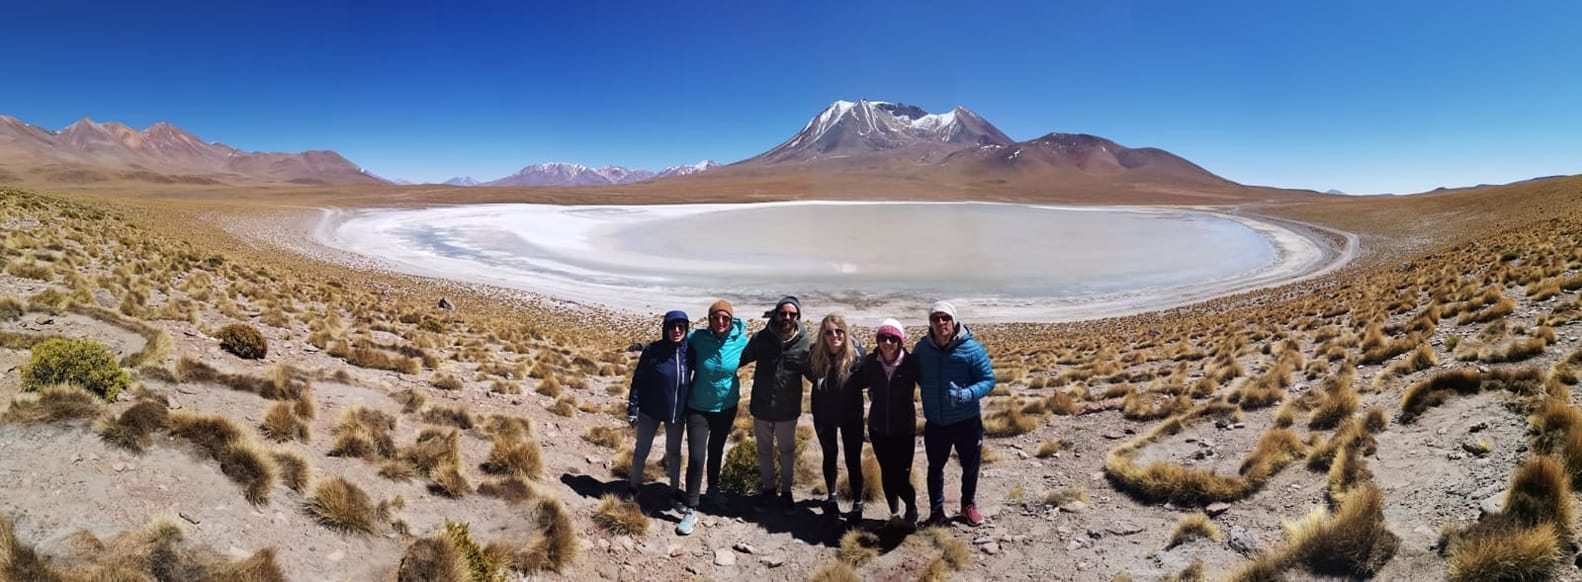 How to book the best Salt Flats tour from Uyuni